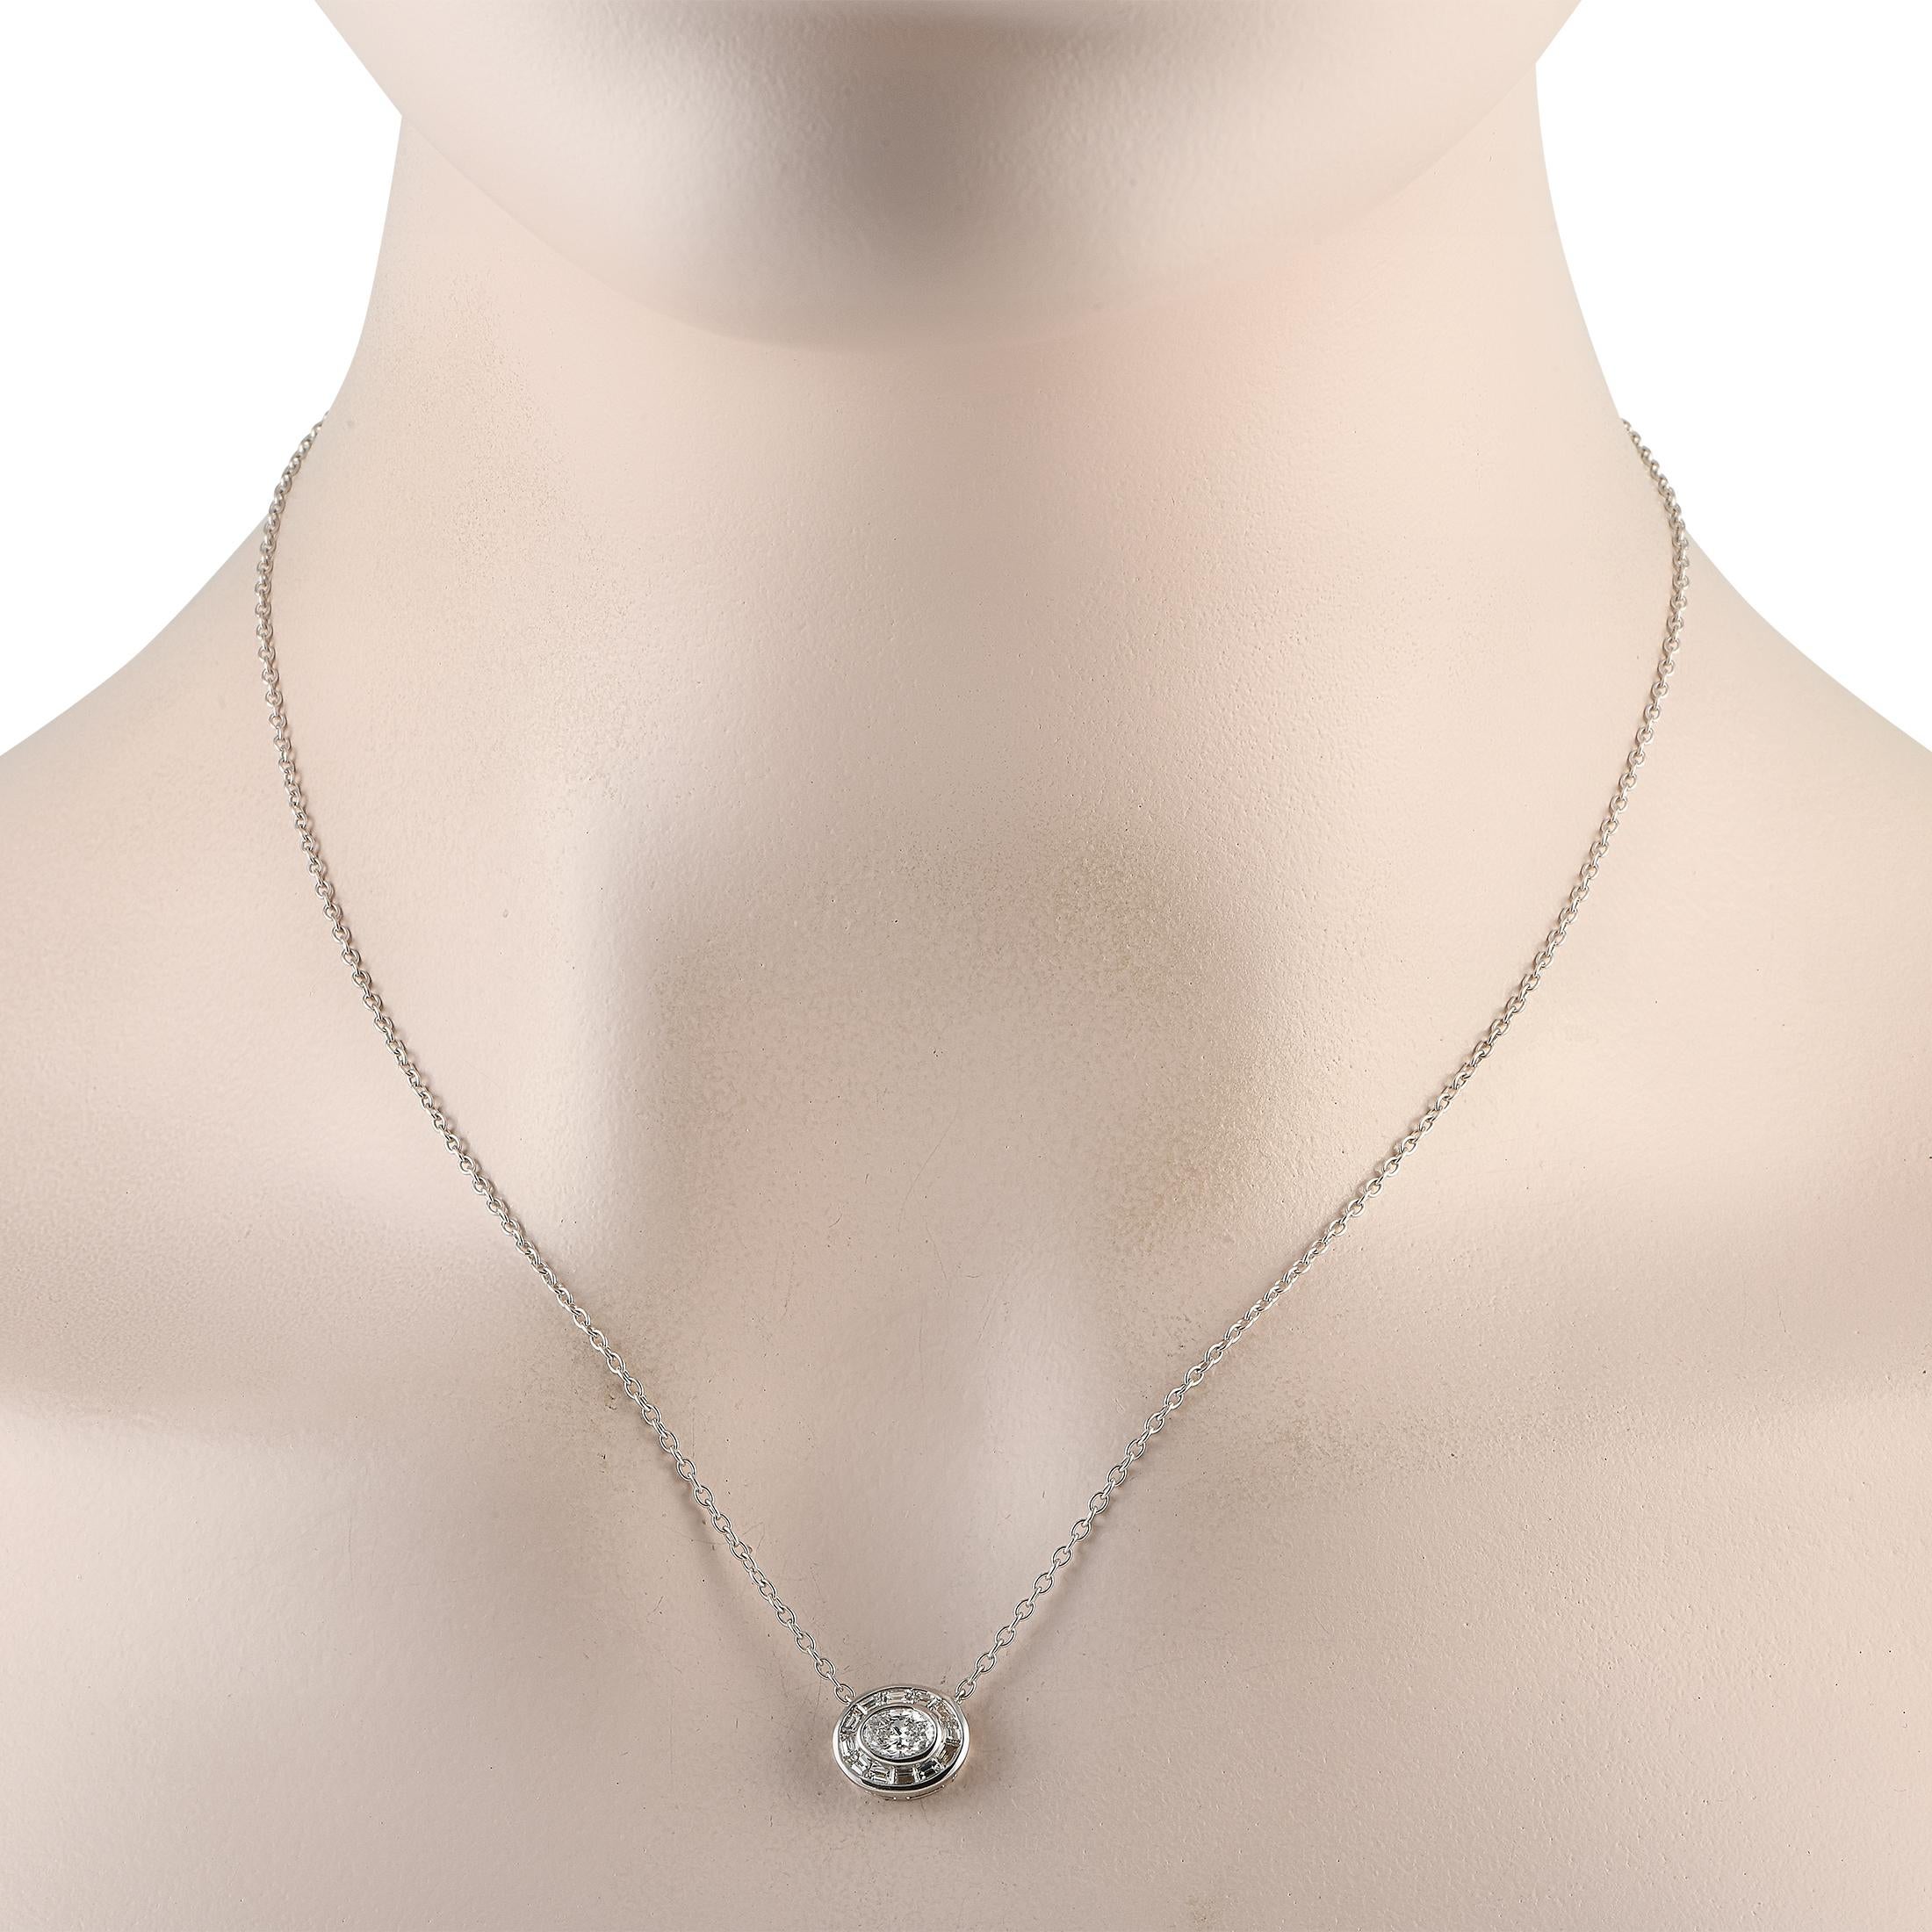 This is the necklace that will add a touch of refinement to every outfit. This white gold piece features an oval-shaped pendant bearing a 0.51-carat oval diamond center in a bezel setting, haloed by 0.49 ct tapered baguette diamonds. The pendant